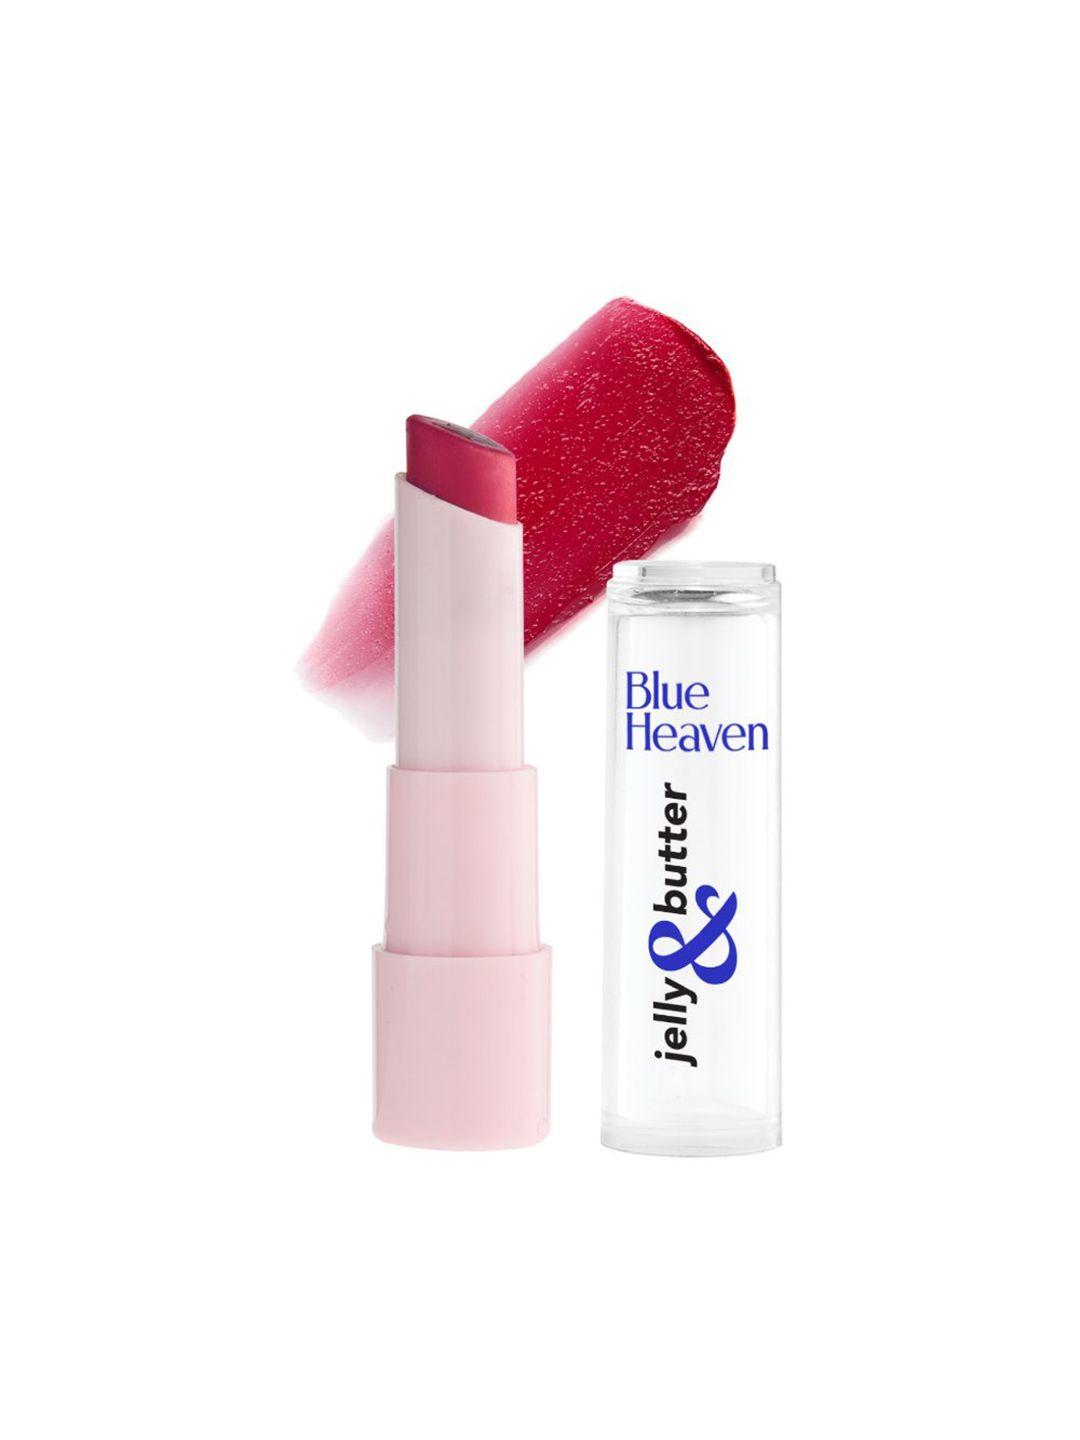 blue heaven jelly & butter hydrating lip balm with shea butter & vitamin e - pink rose 3 g